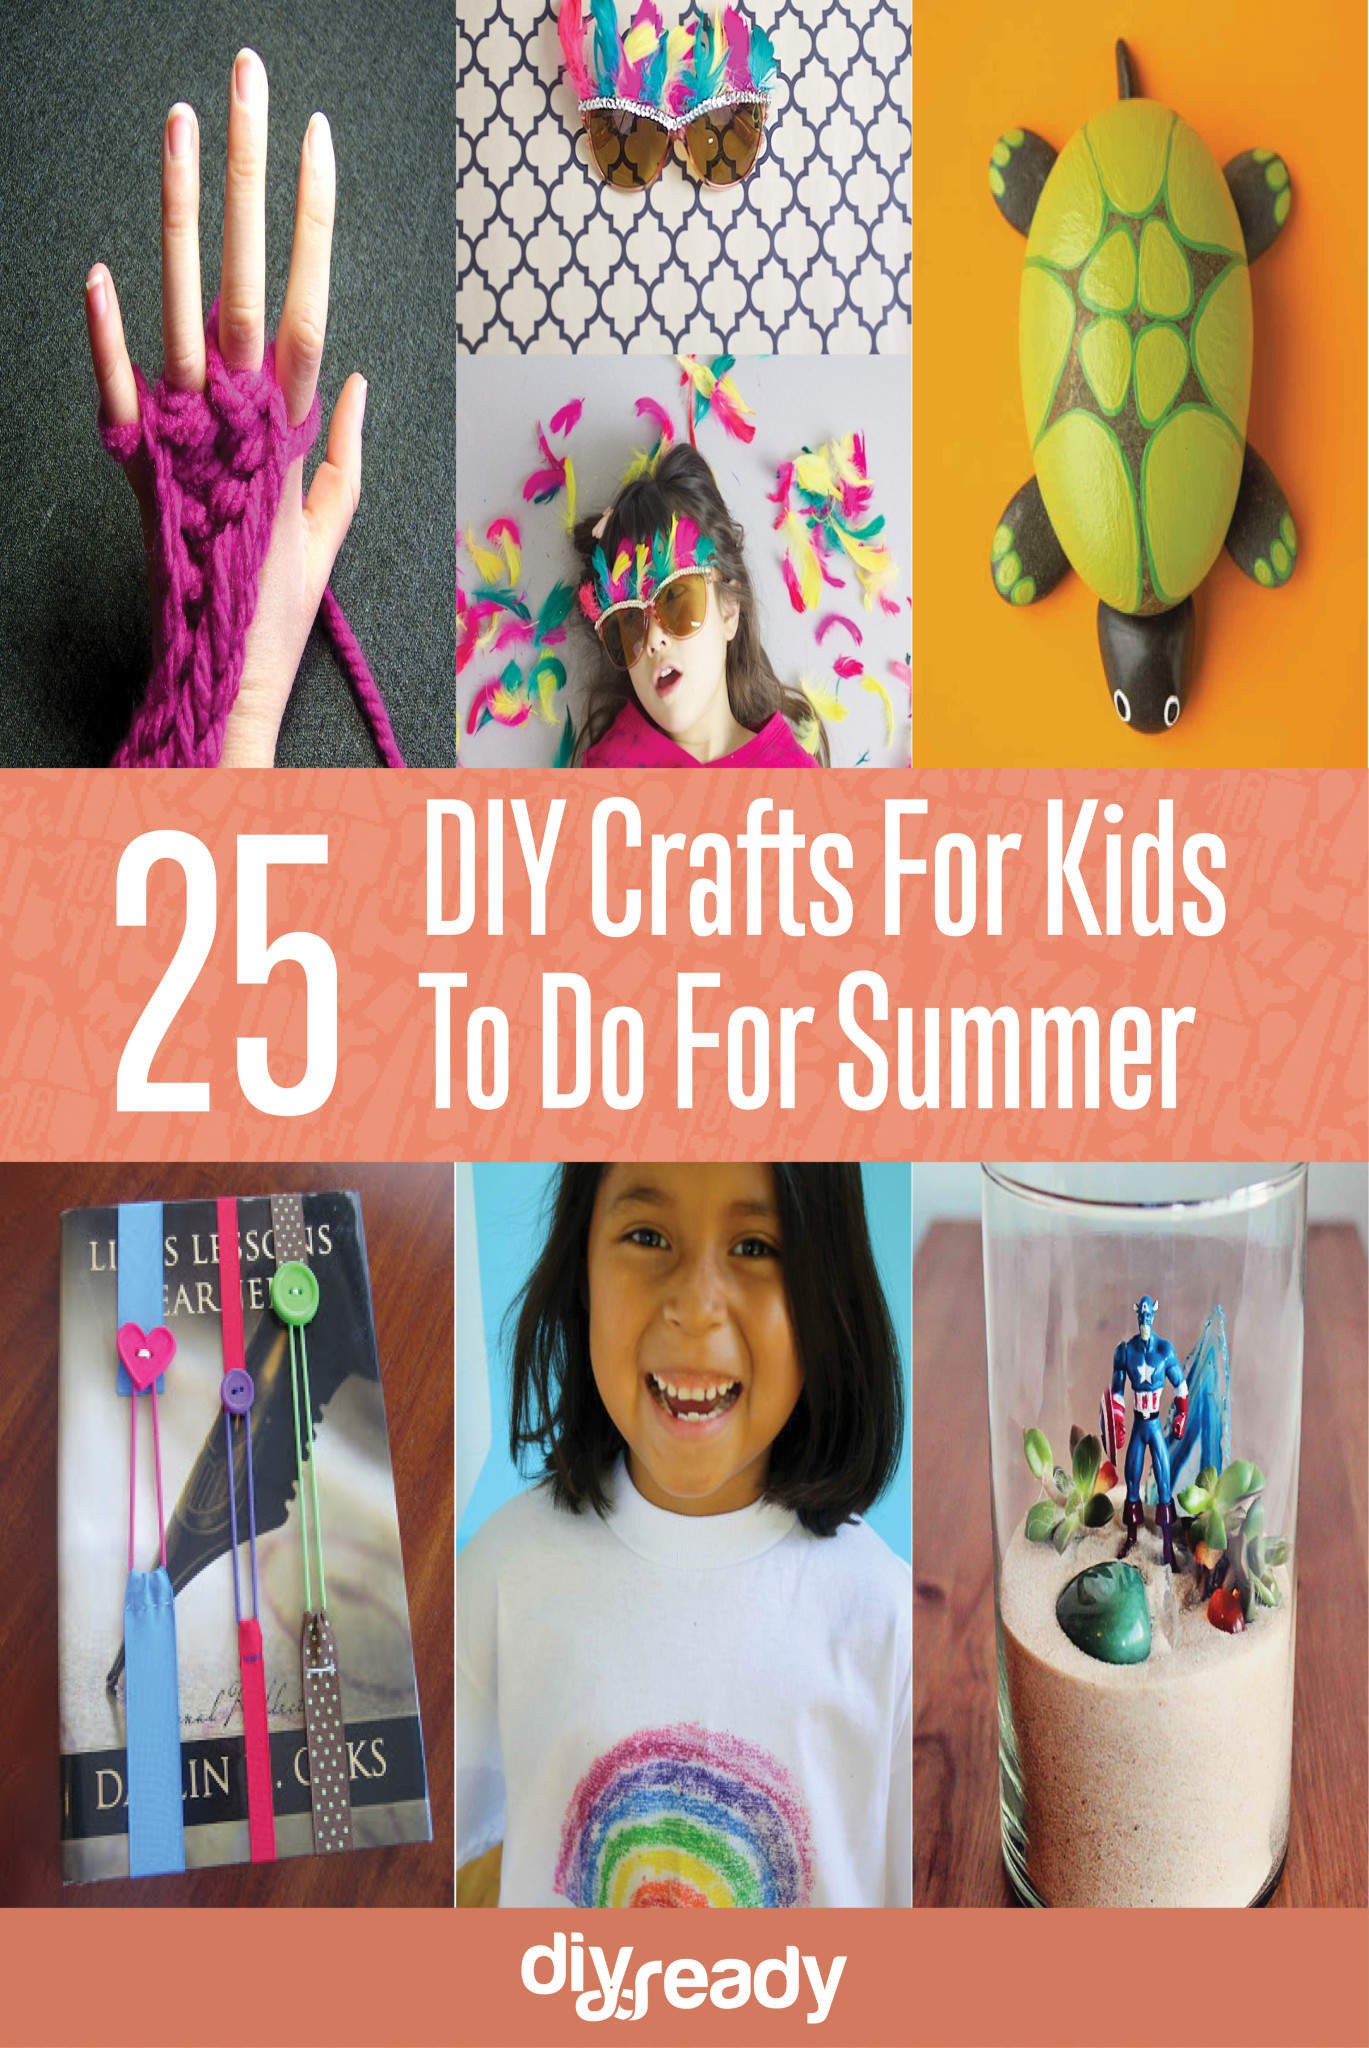 DIY Projects For Toddlers
 Crafts for Kids DIY Projects Craft Ideas & How To’s for